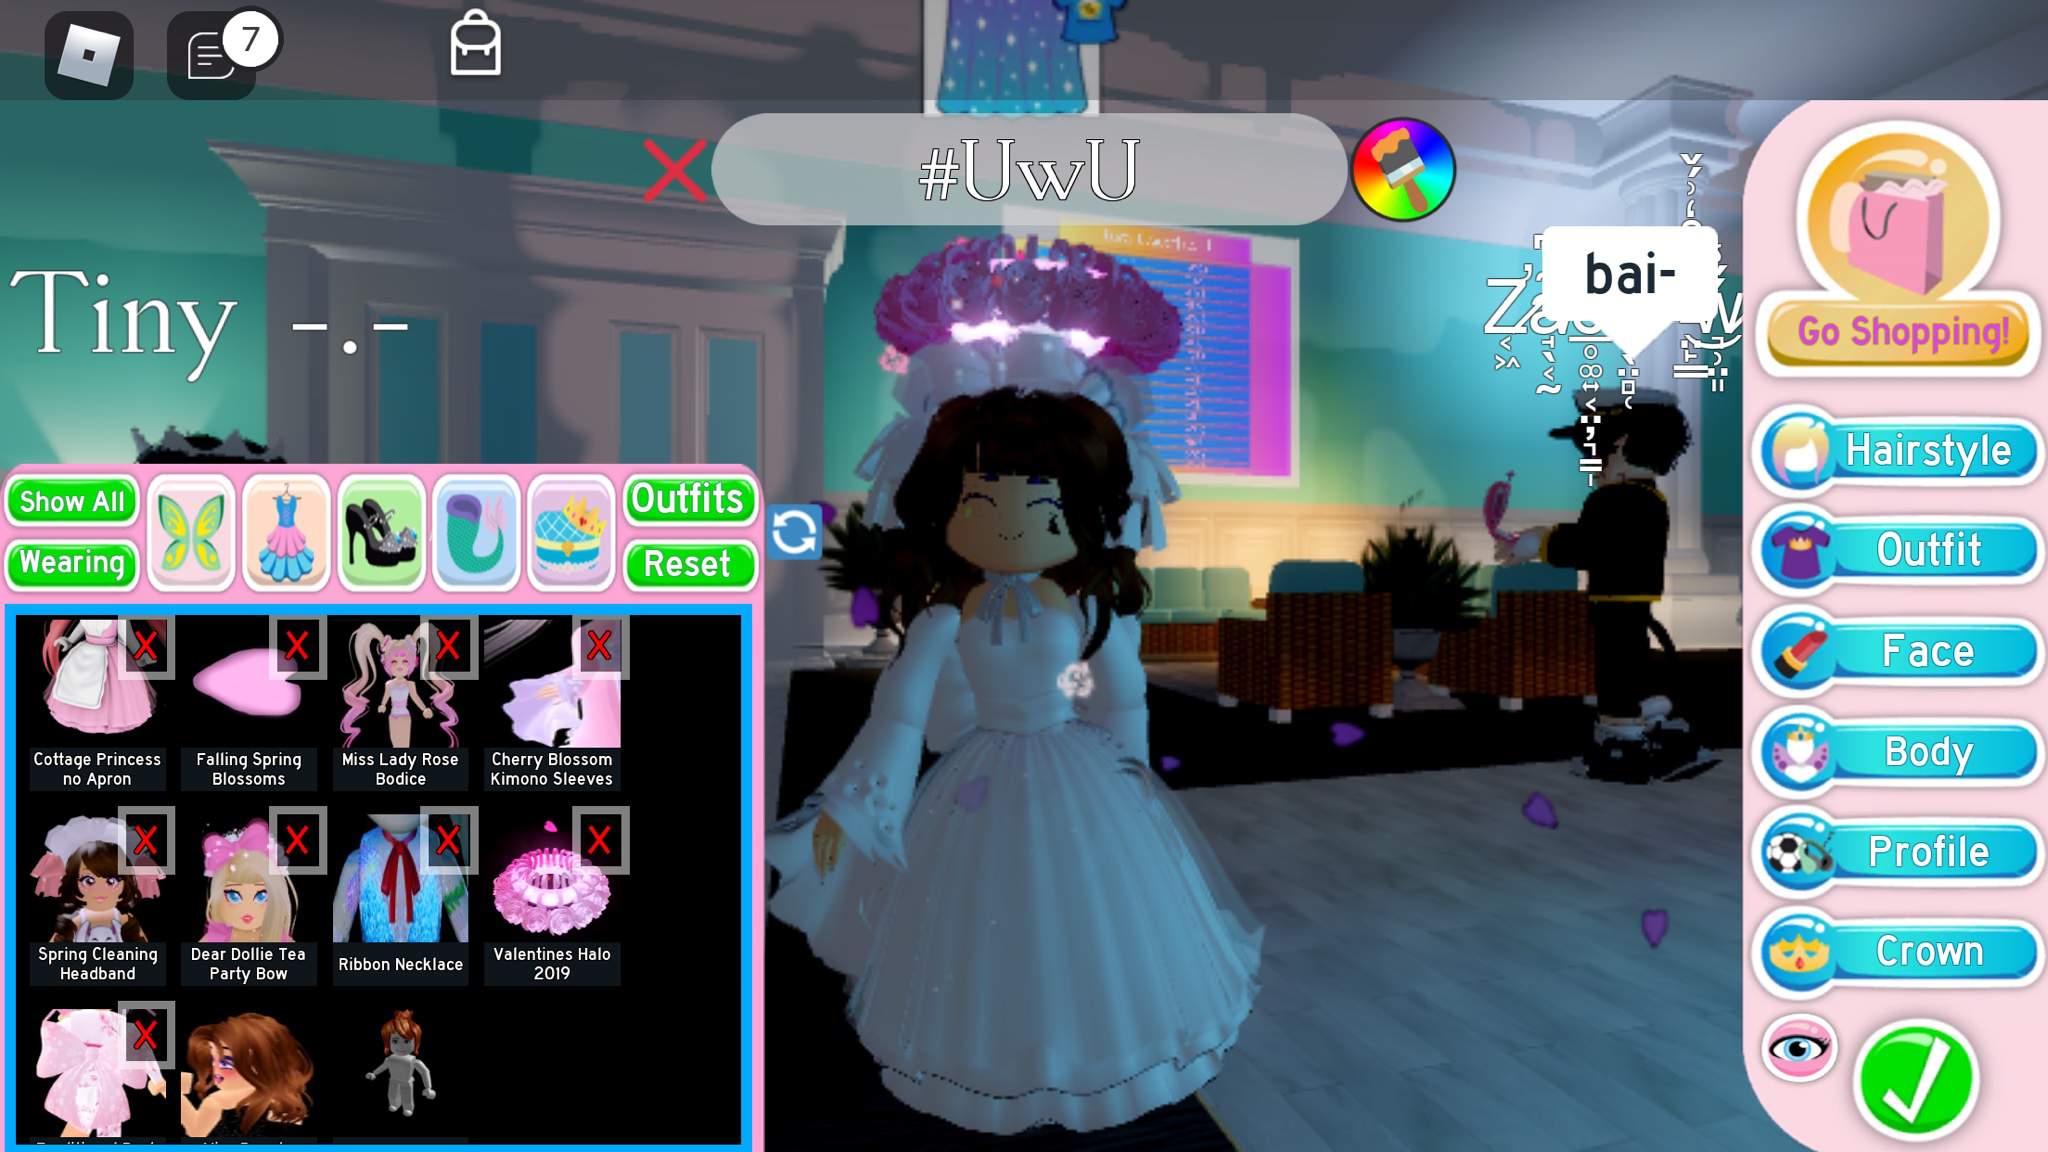 Trading My Val Halo 2019 | Wiki | ⛲🌸Royale High🌸⛲(Roblox) Amino